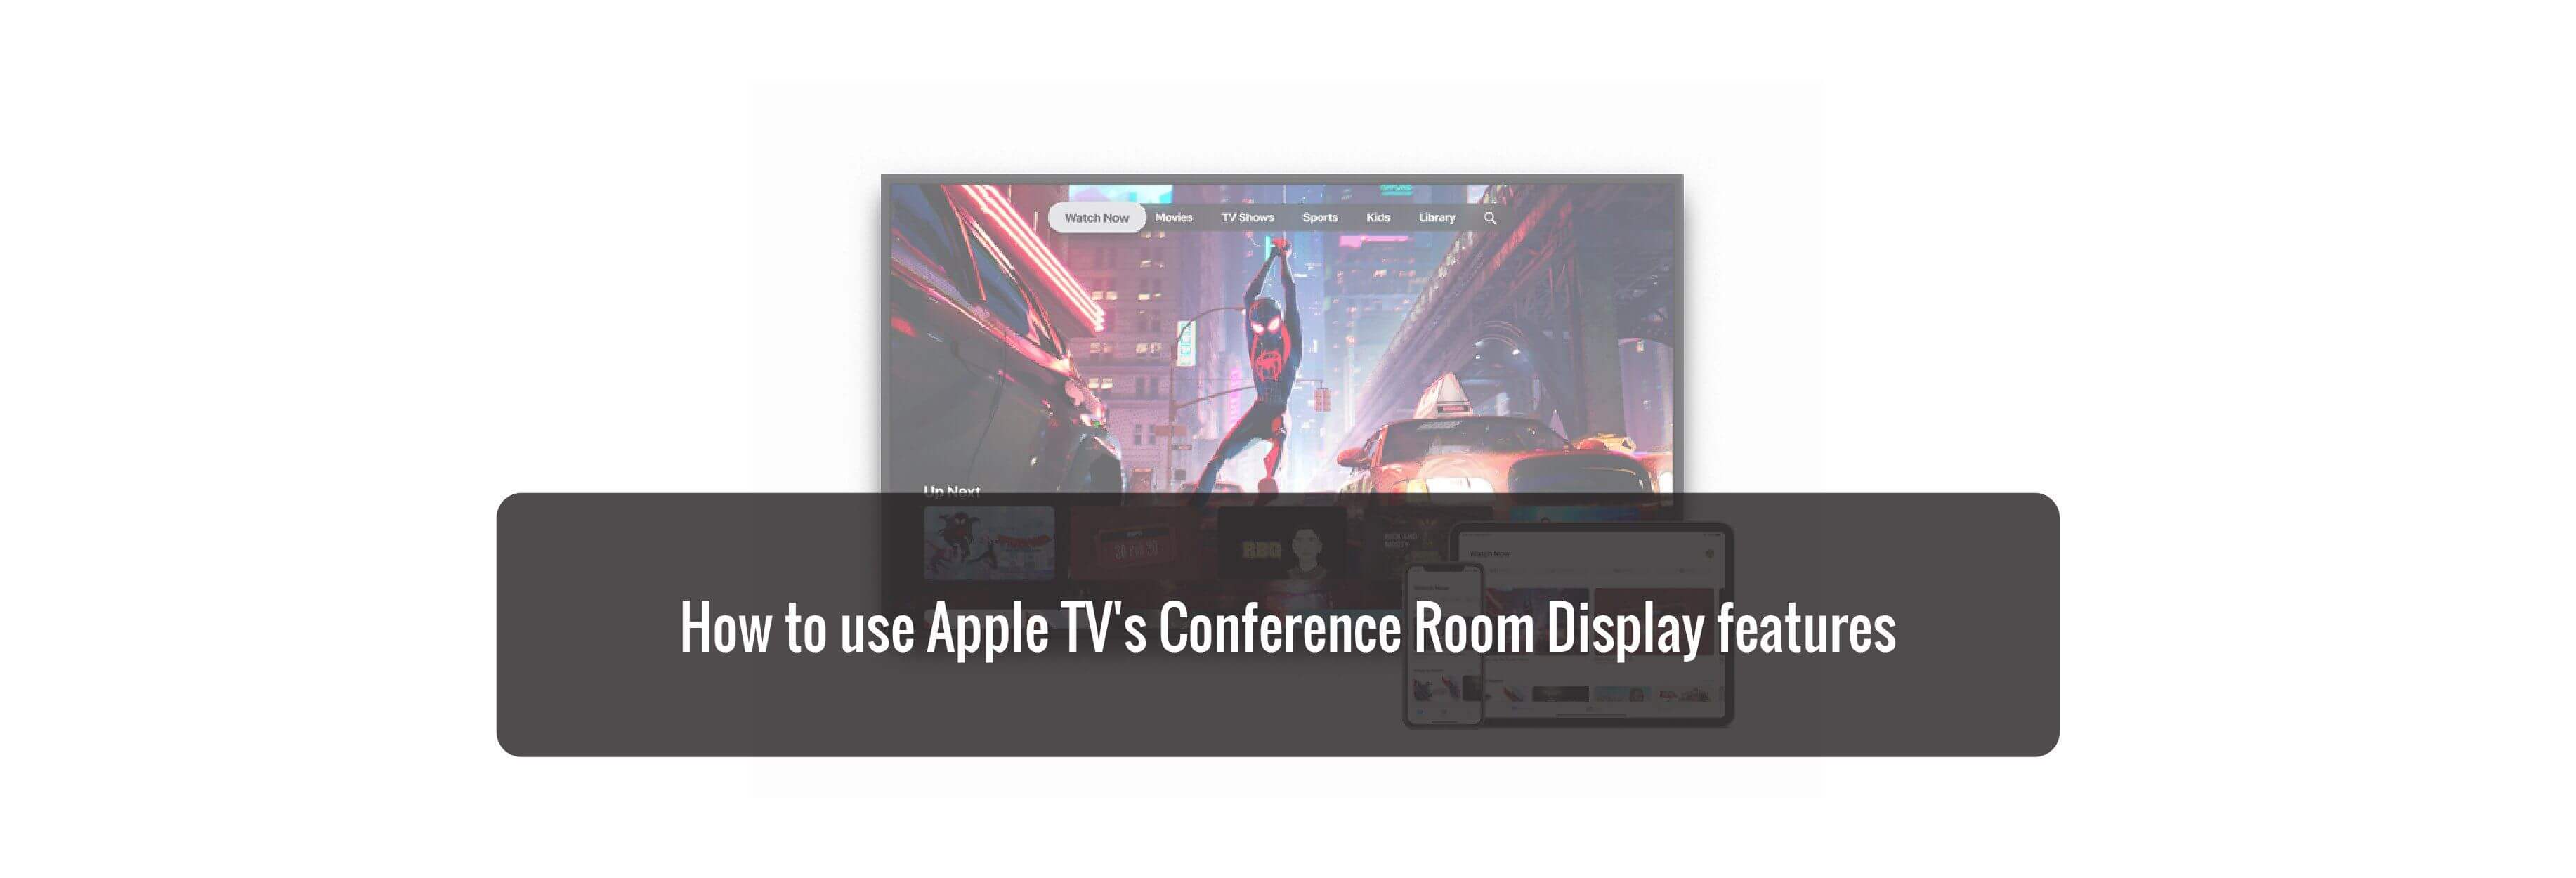 How to use Apple TV's Conference Room Display features